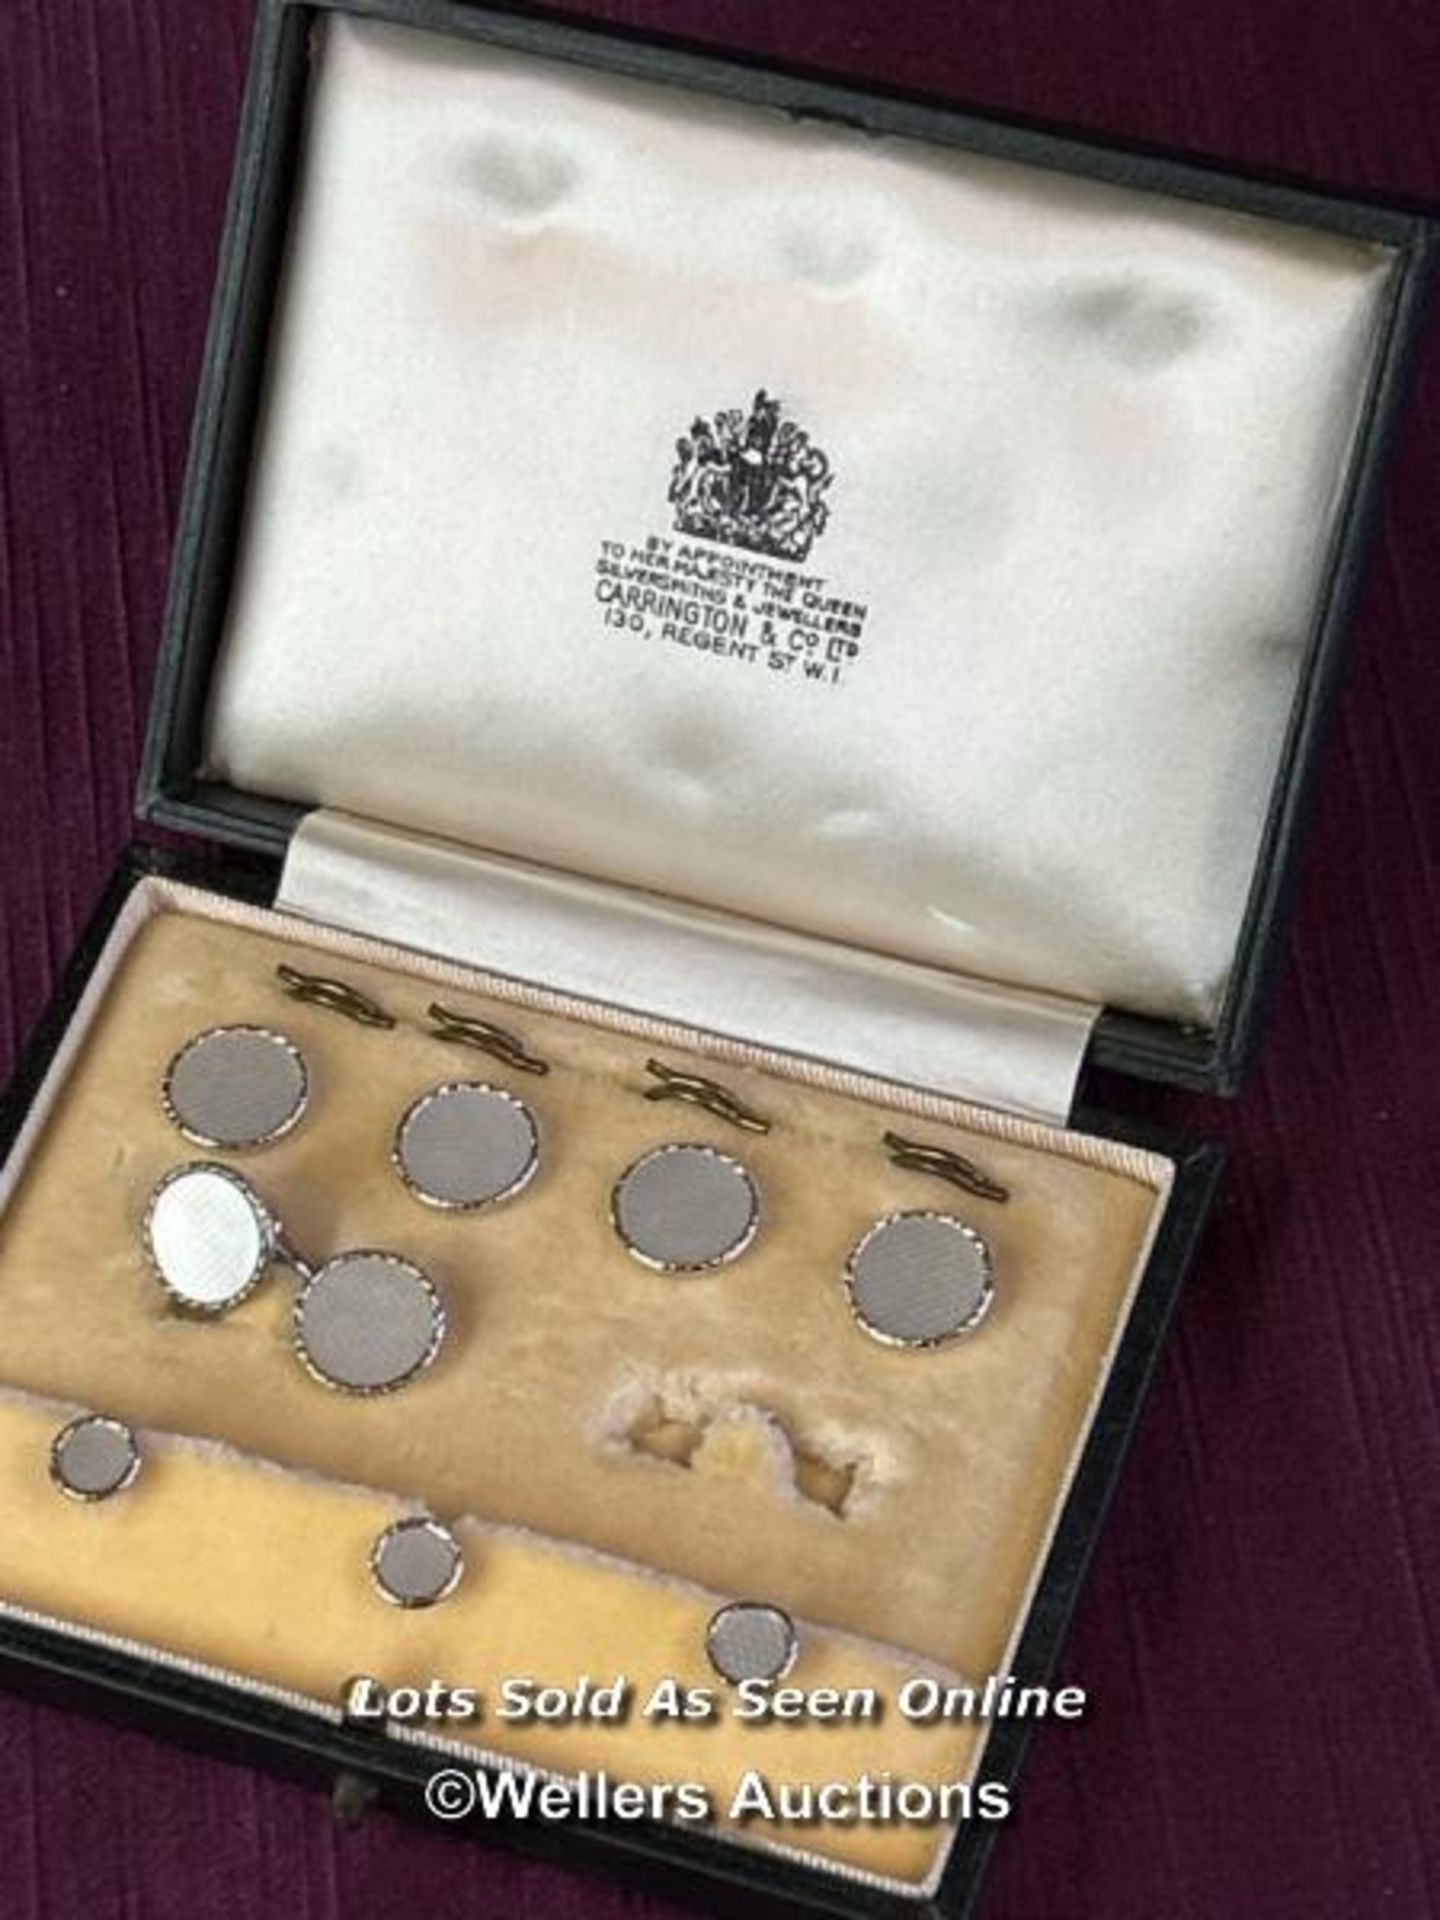 925 SILVER BUTTON AND CUFFLINK SET (MISSING CUFFLINK HAS NOW BEEN FOUND, NOT YET PHOTOGRAPHED)